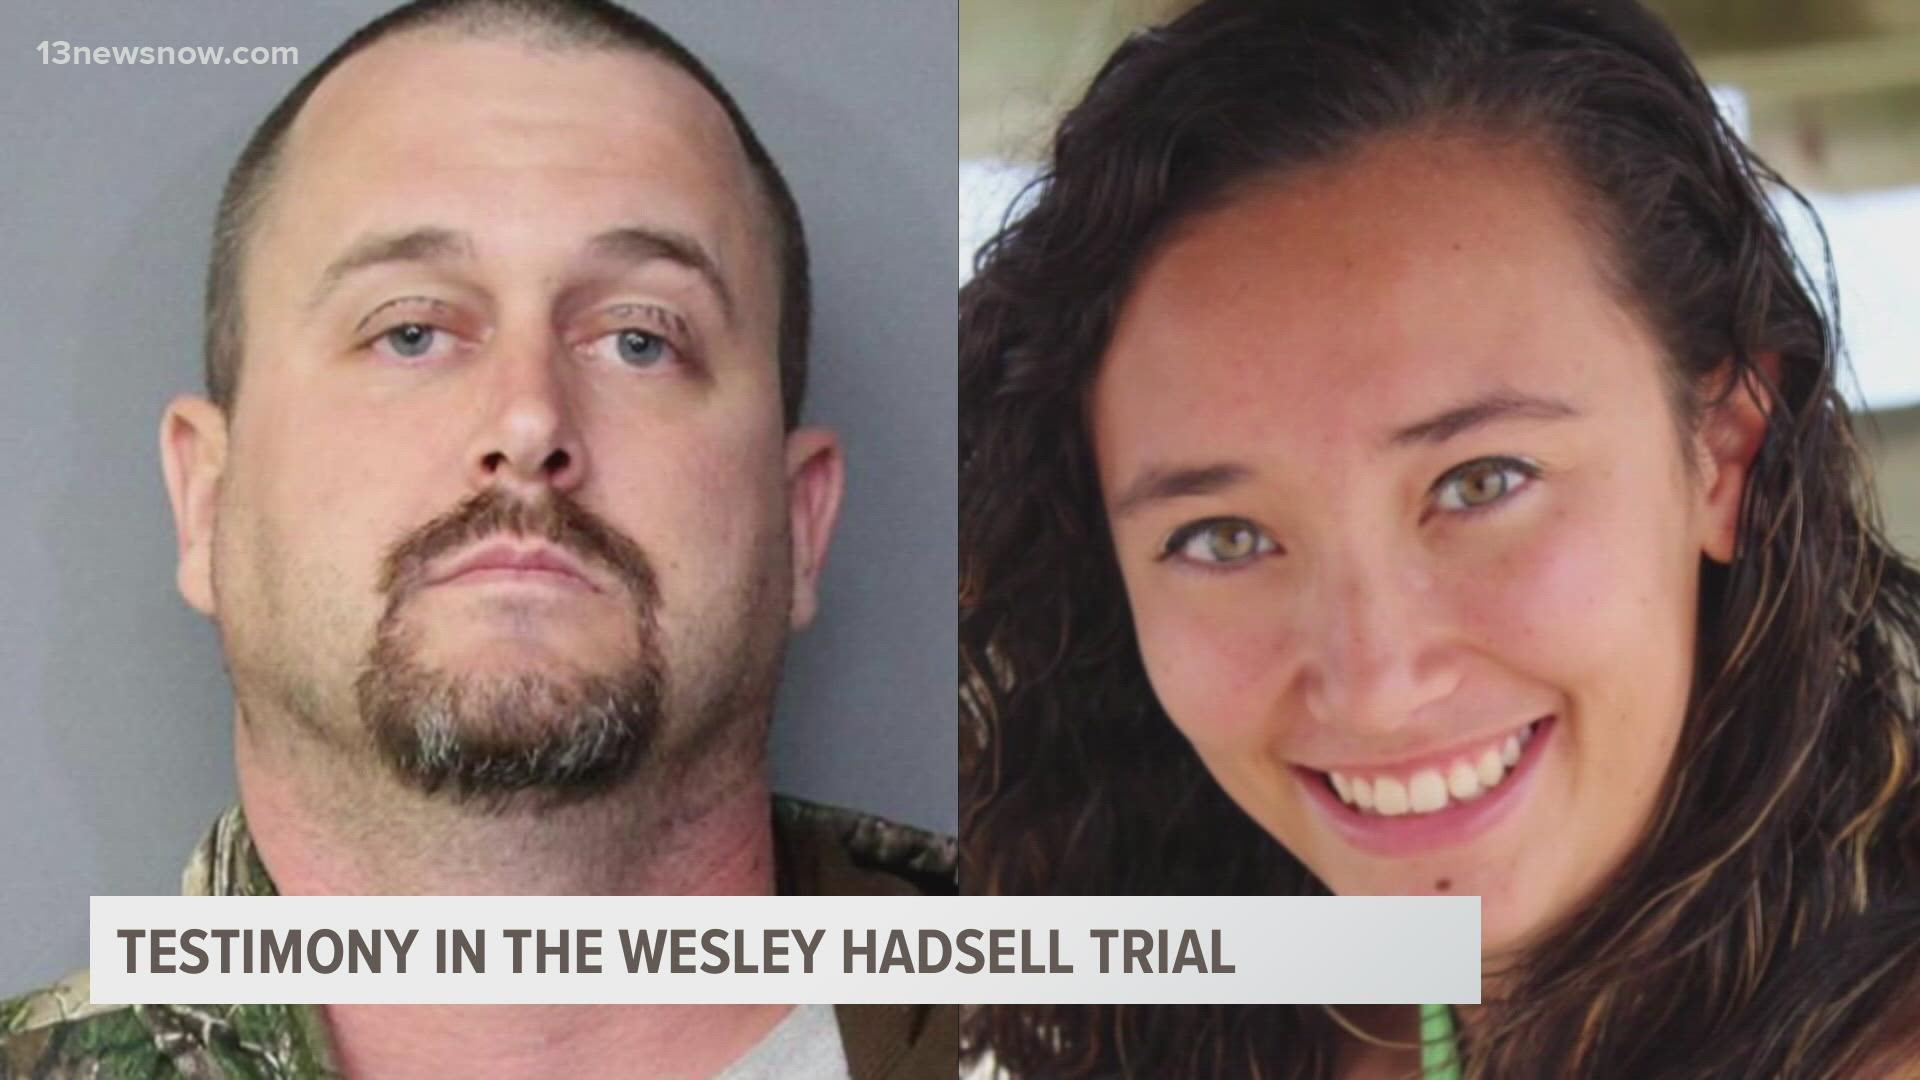 Wesley Hadsell is accused of killing his step-daughter AJ Hadsell in 2015 while she was home on spring break from Longwood University.